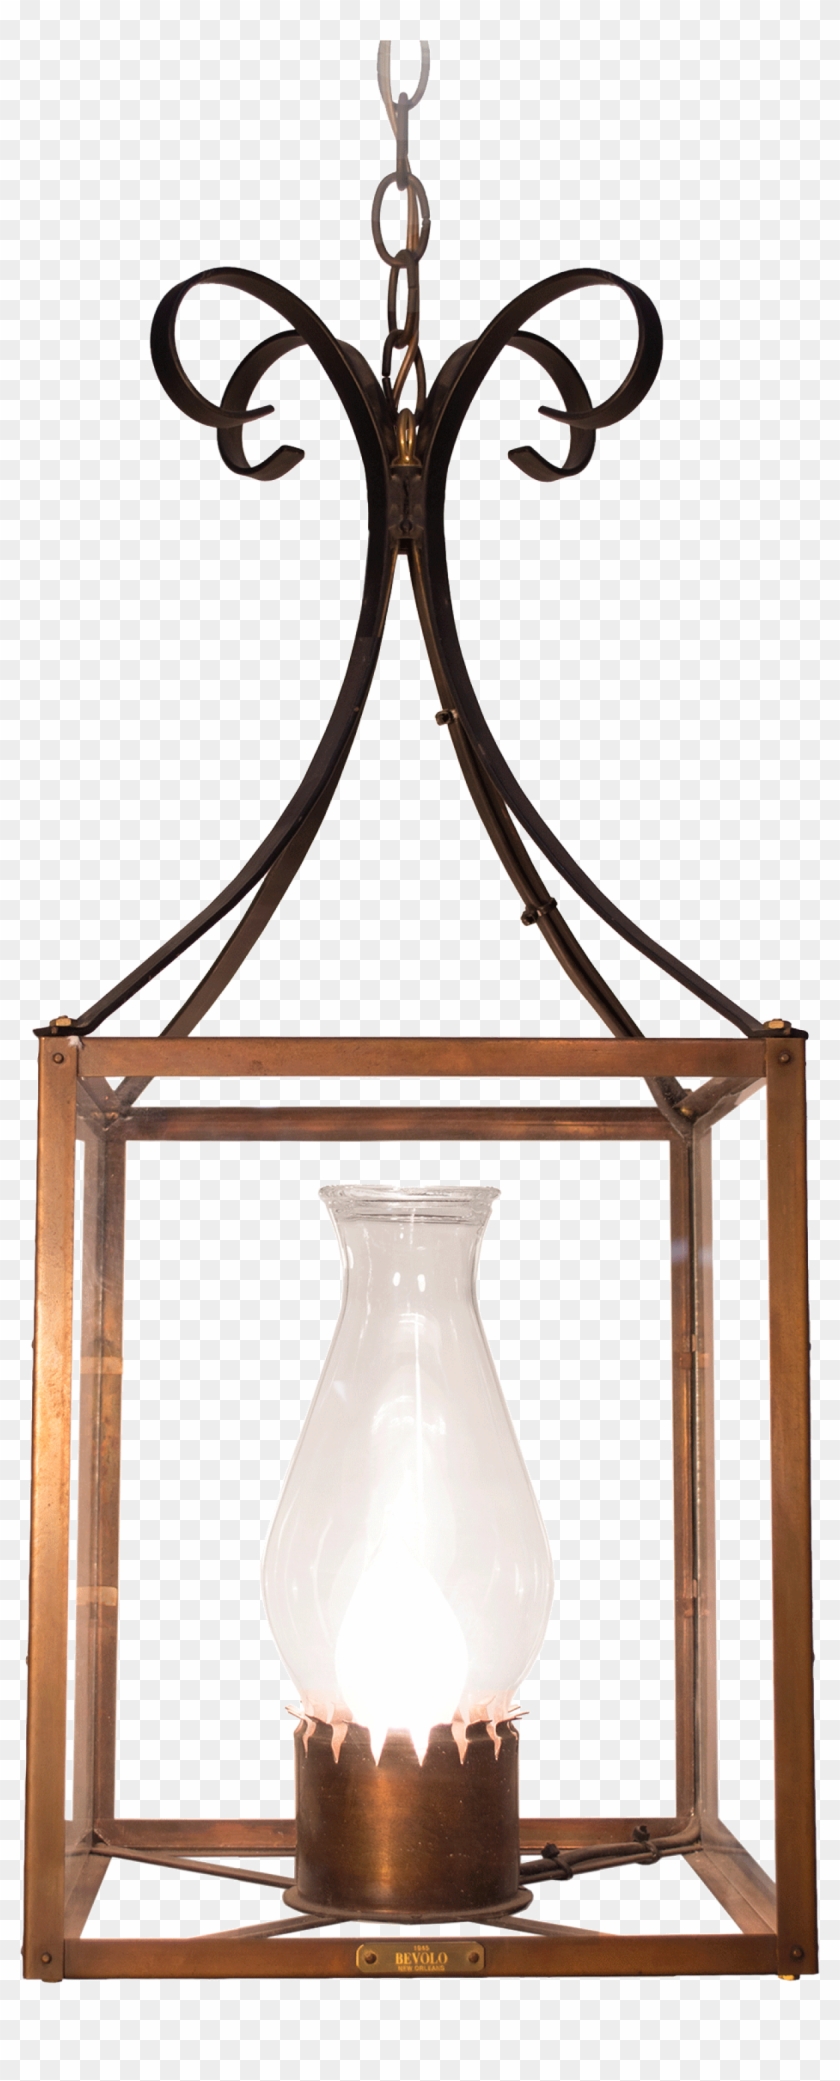 Square Hanging Light Copper Lights Bevolo Gas Electric - Square Hanging Light Copper Lights Bevolo Gas Electric #865126